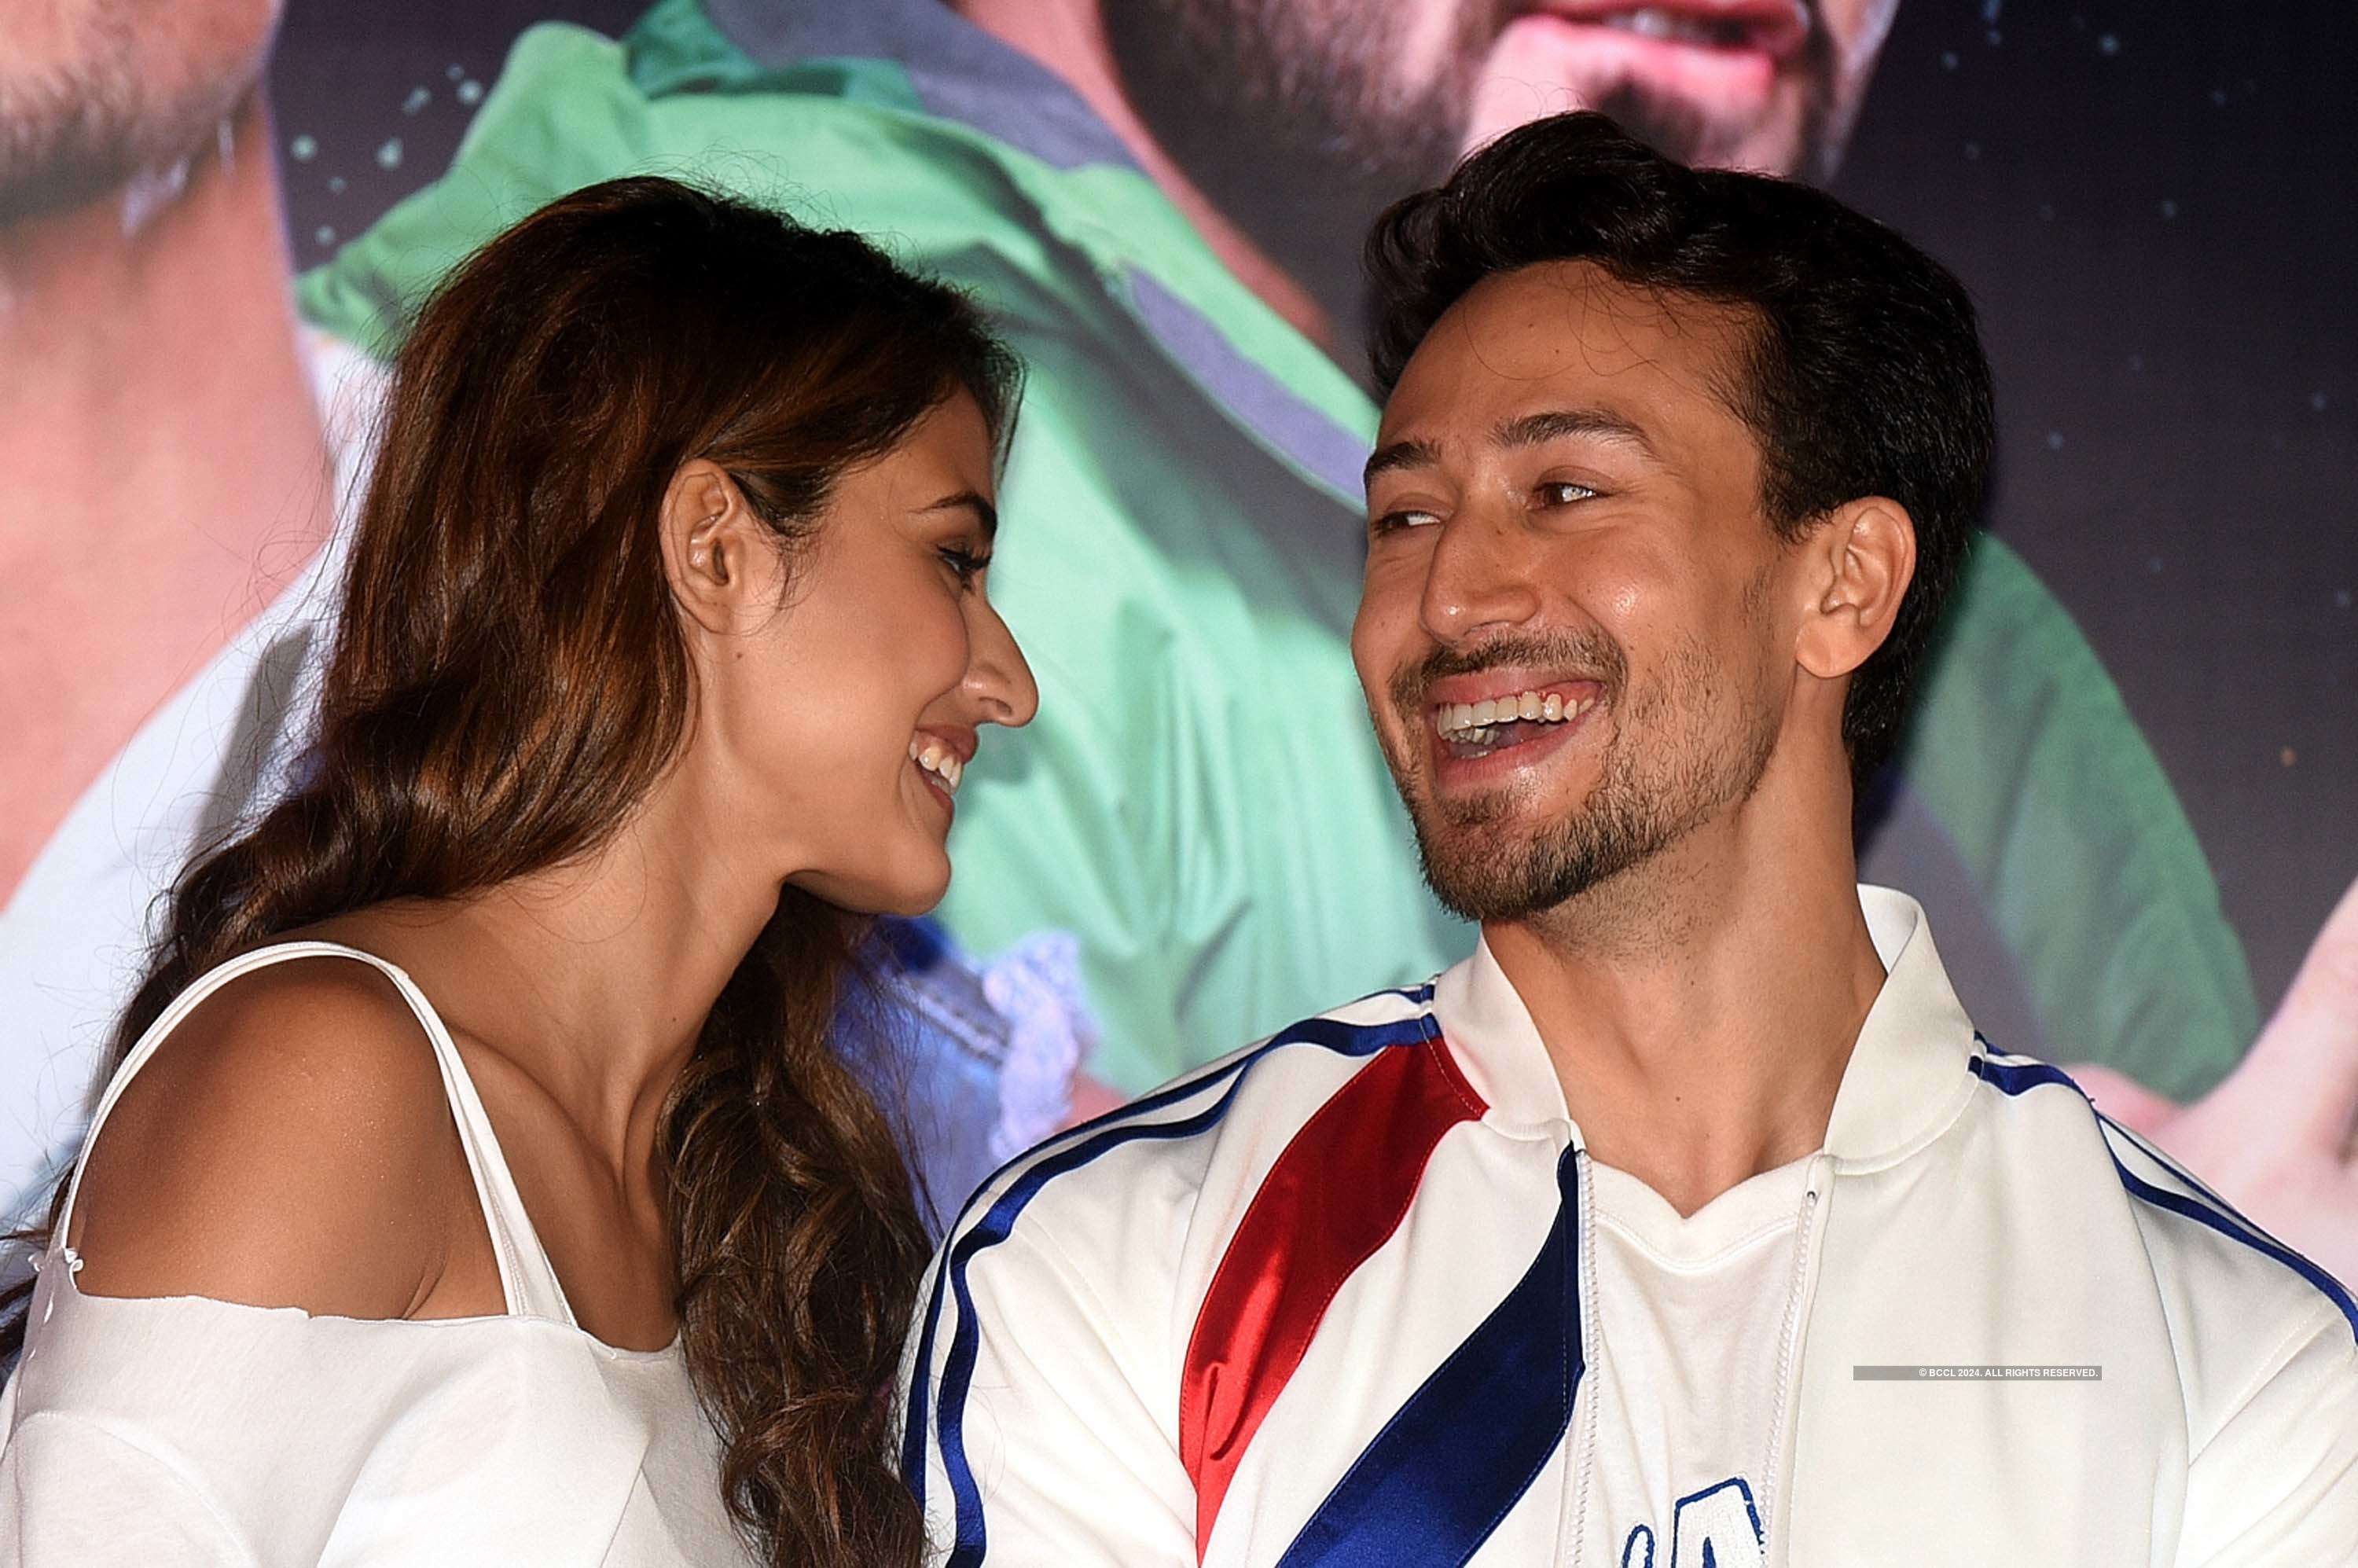 New pictures of Disha Patani & Tiger Shroff from their romantic dinner date